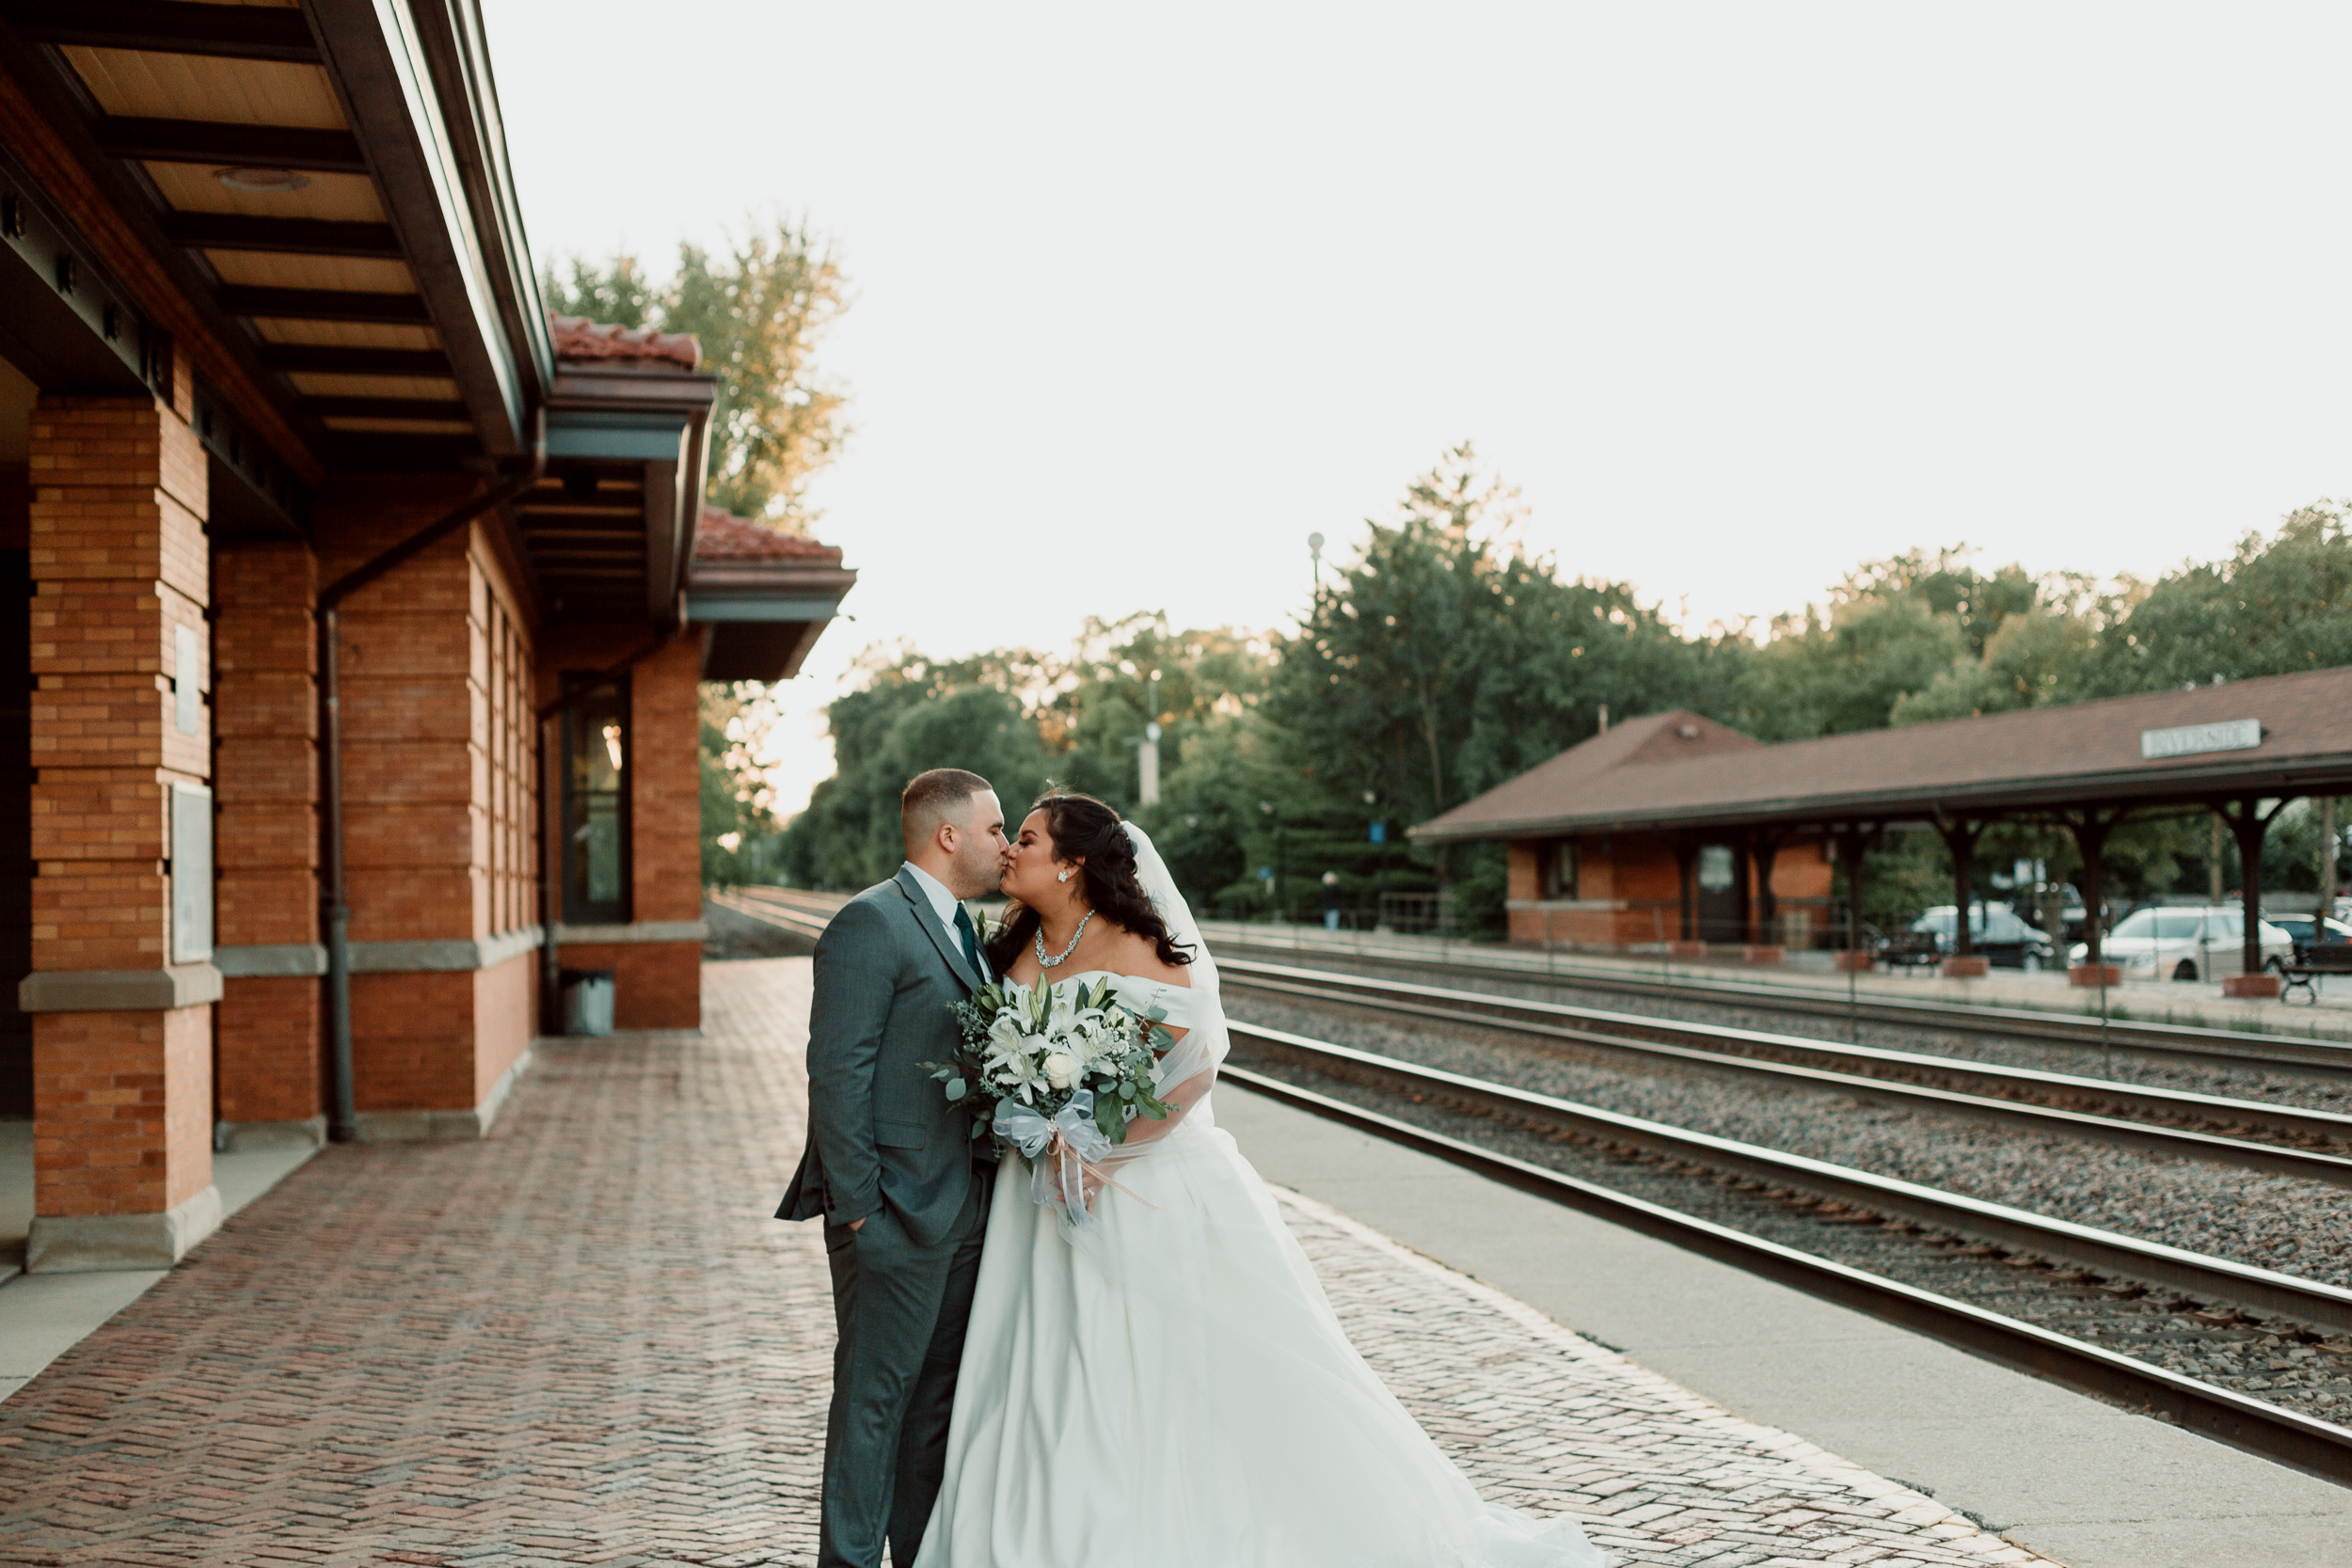 Sunset wedding photos by train station | Backyard Chicago Wedding | Emotional Chicago Wedding | Historic Downtown Riverside Wedding Photos | Chicago Wedding Photographer | Metra Station Wedding Photos | Small Weddings in Chicago | Intimate Elopements in Chicago